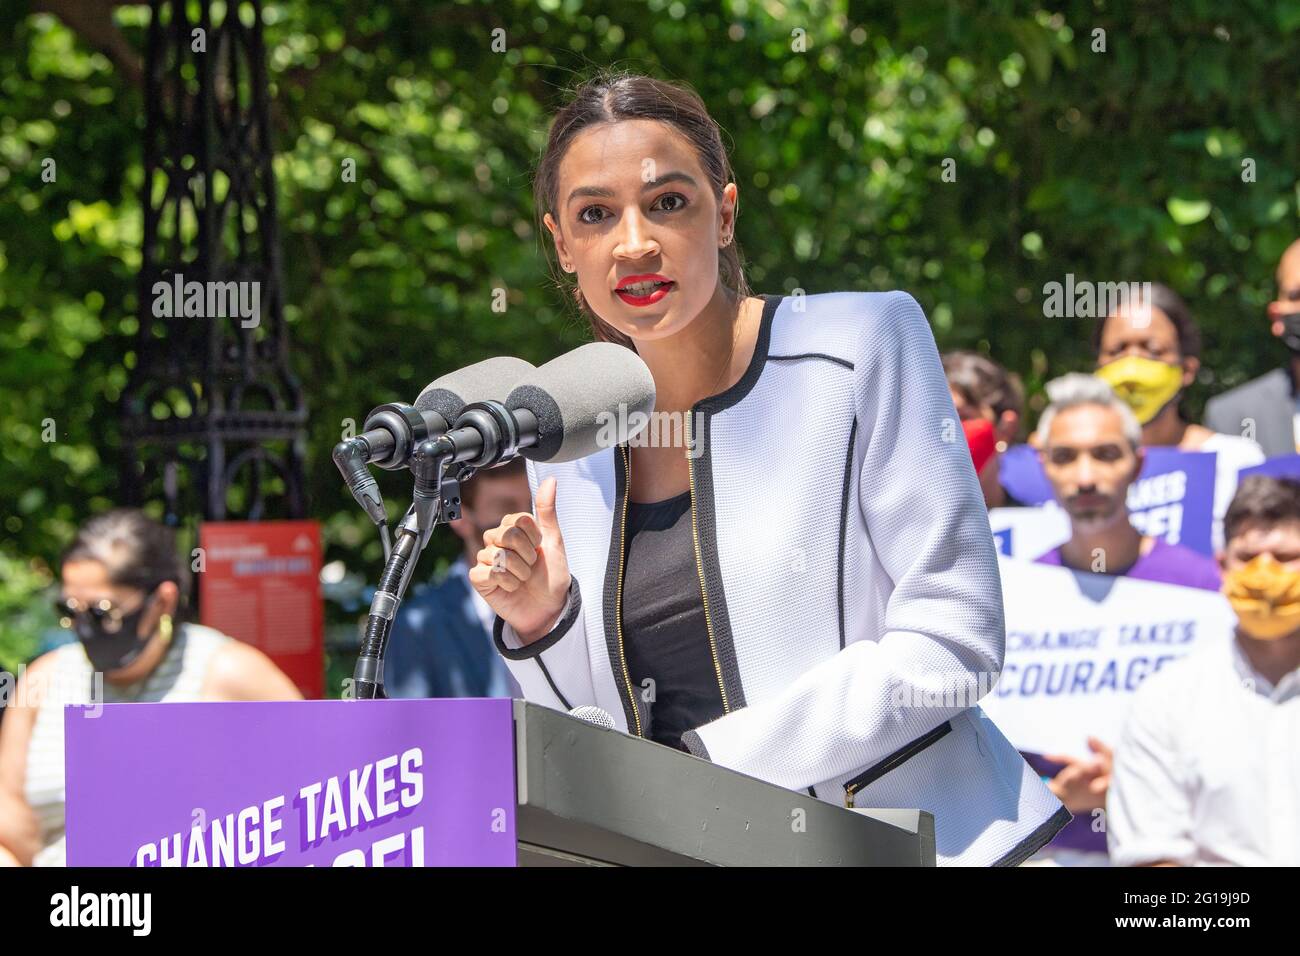 United States Congresswoman Alexandria Ocasio-Cortez speaks at a rally outside City Hall in New York City. Representative Alexandria Ocasio-Cortez endorses Juumane Williams for Public Advocate, Brad Lander for Comptroller as well as 60 progressive New York City Council candidates, stretching across all five boroughs, who took the Courage To Change pledge. (Photo by Ron Adar / SOPA Images/Sipa USA) Stock Photo